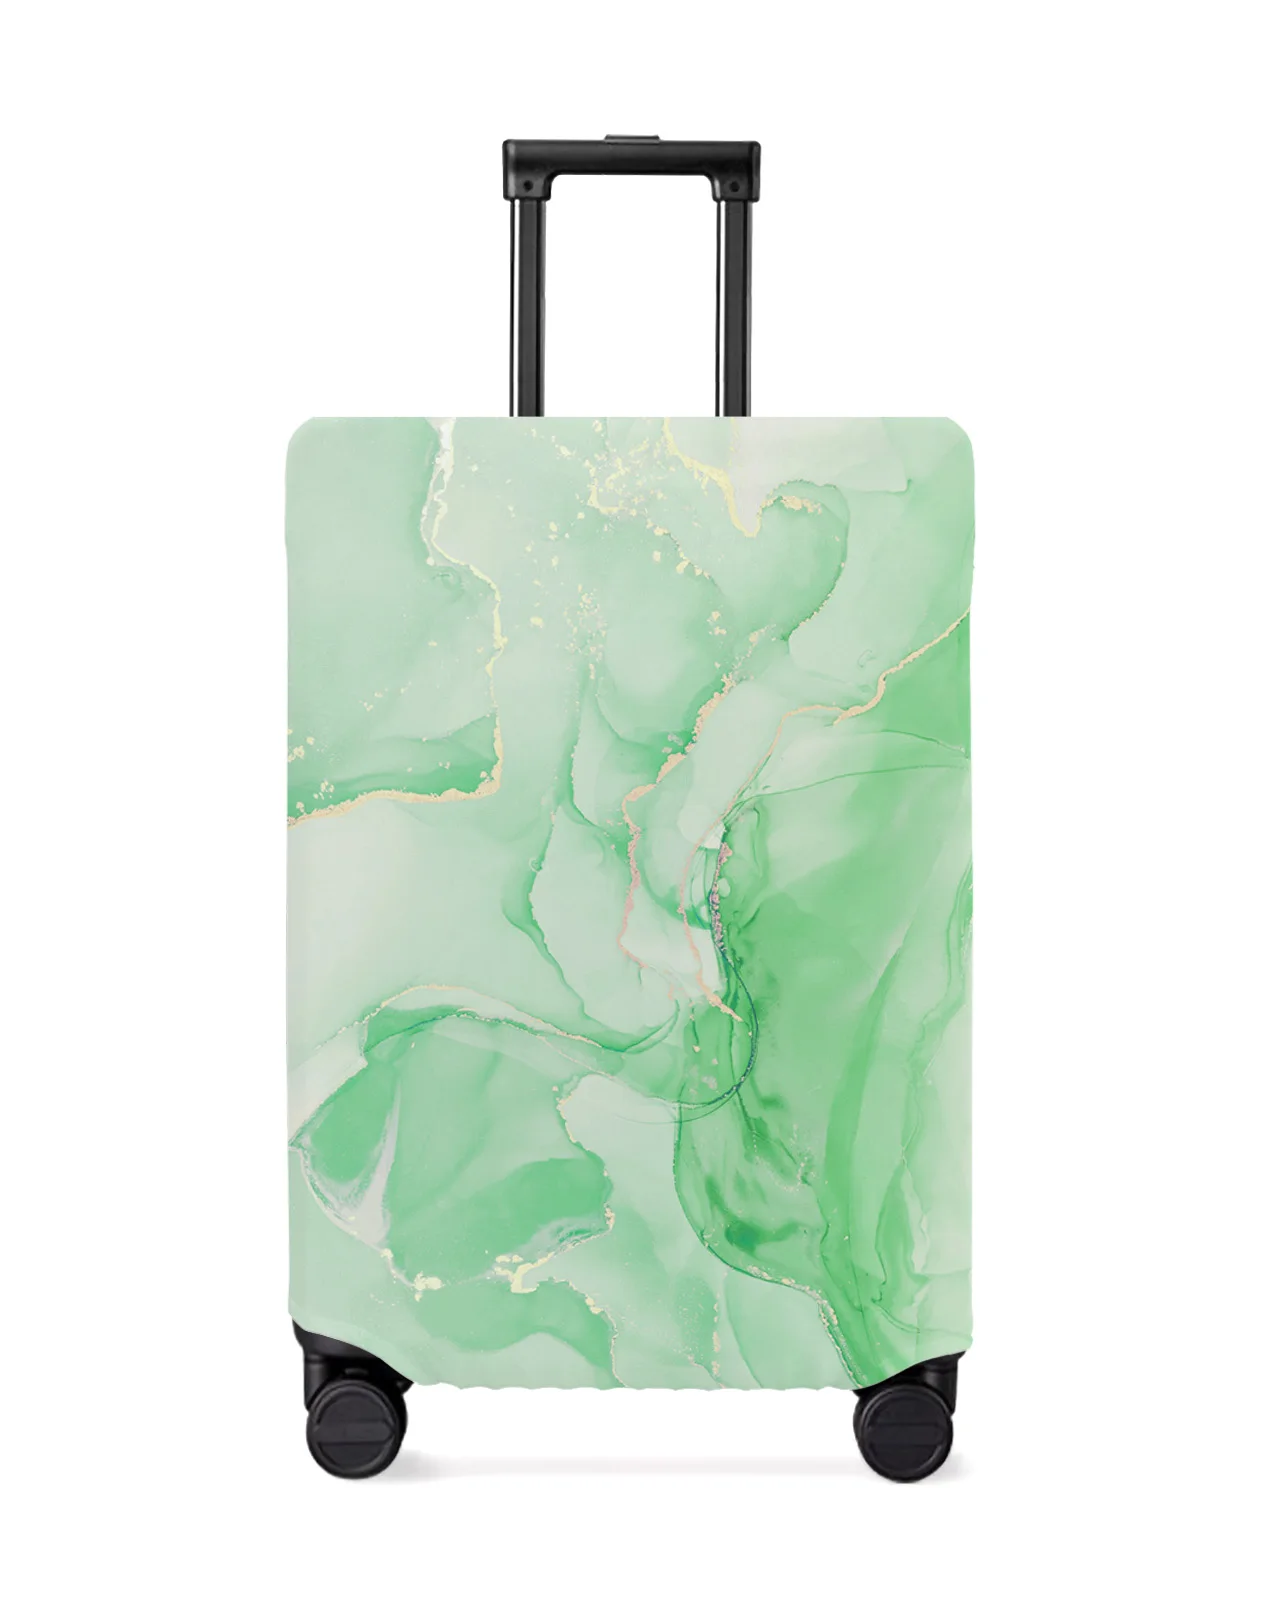 marble-texture-gradient-green-luggage-cover-stretch-suitcase-protector-baggage-dust-cover-for-18-32-inch-travel-suitcase-case